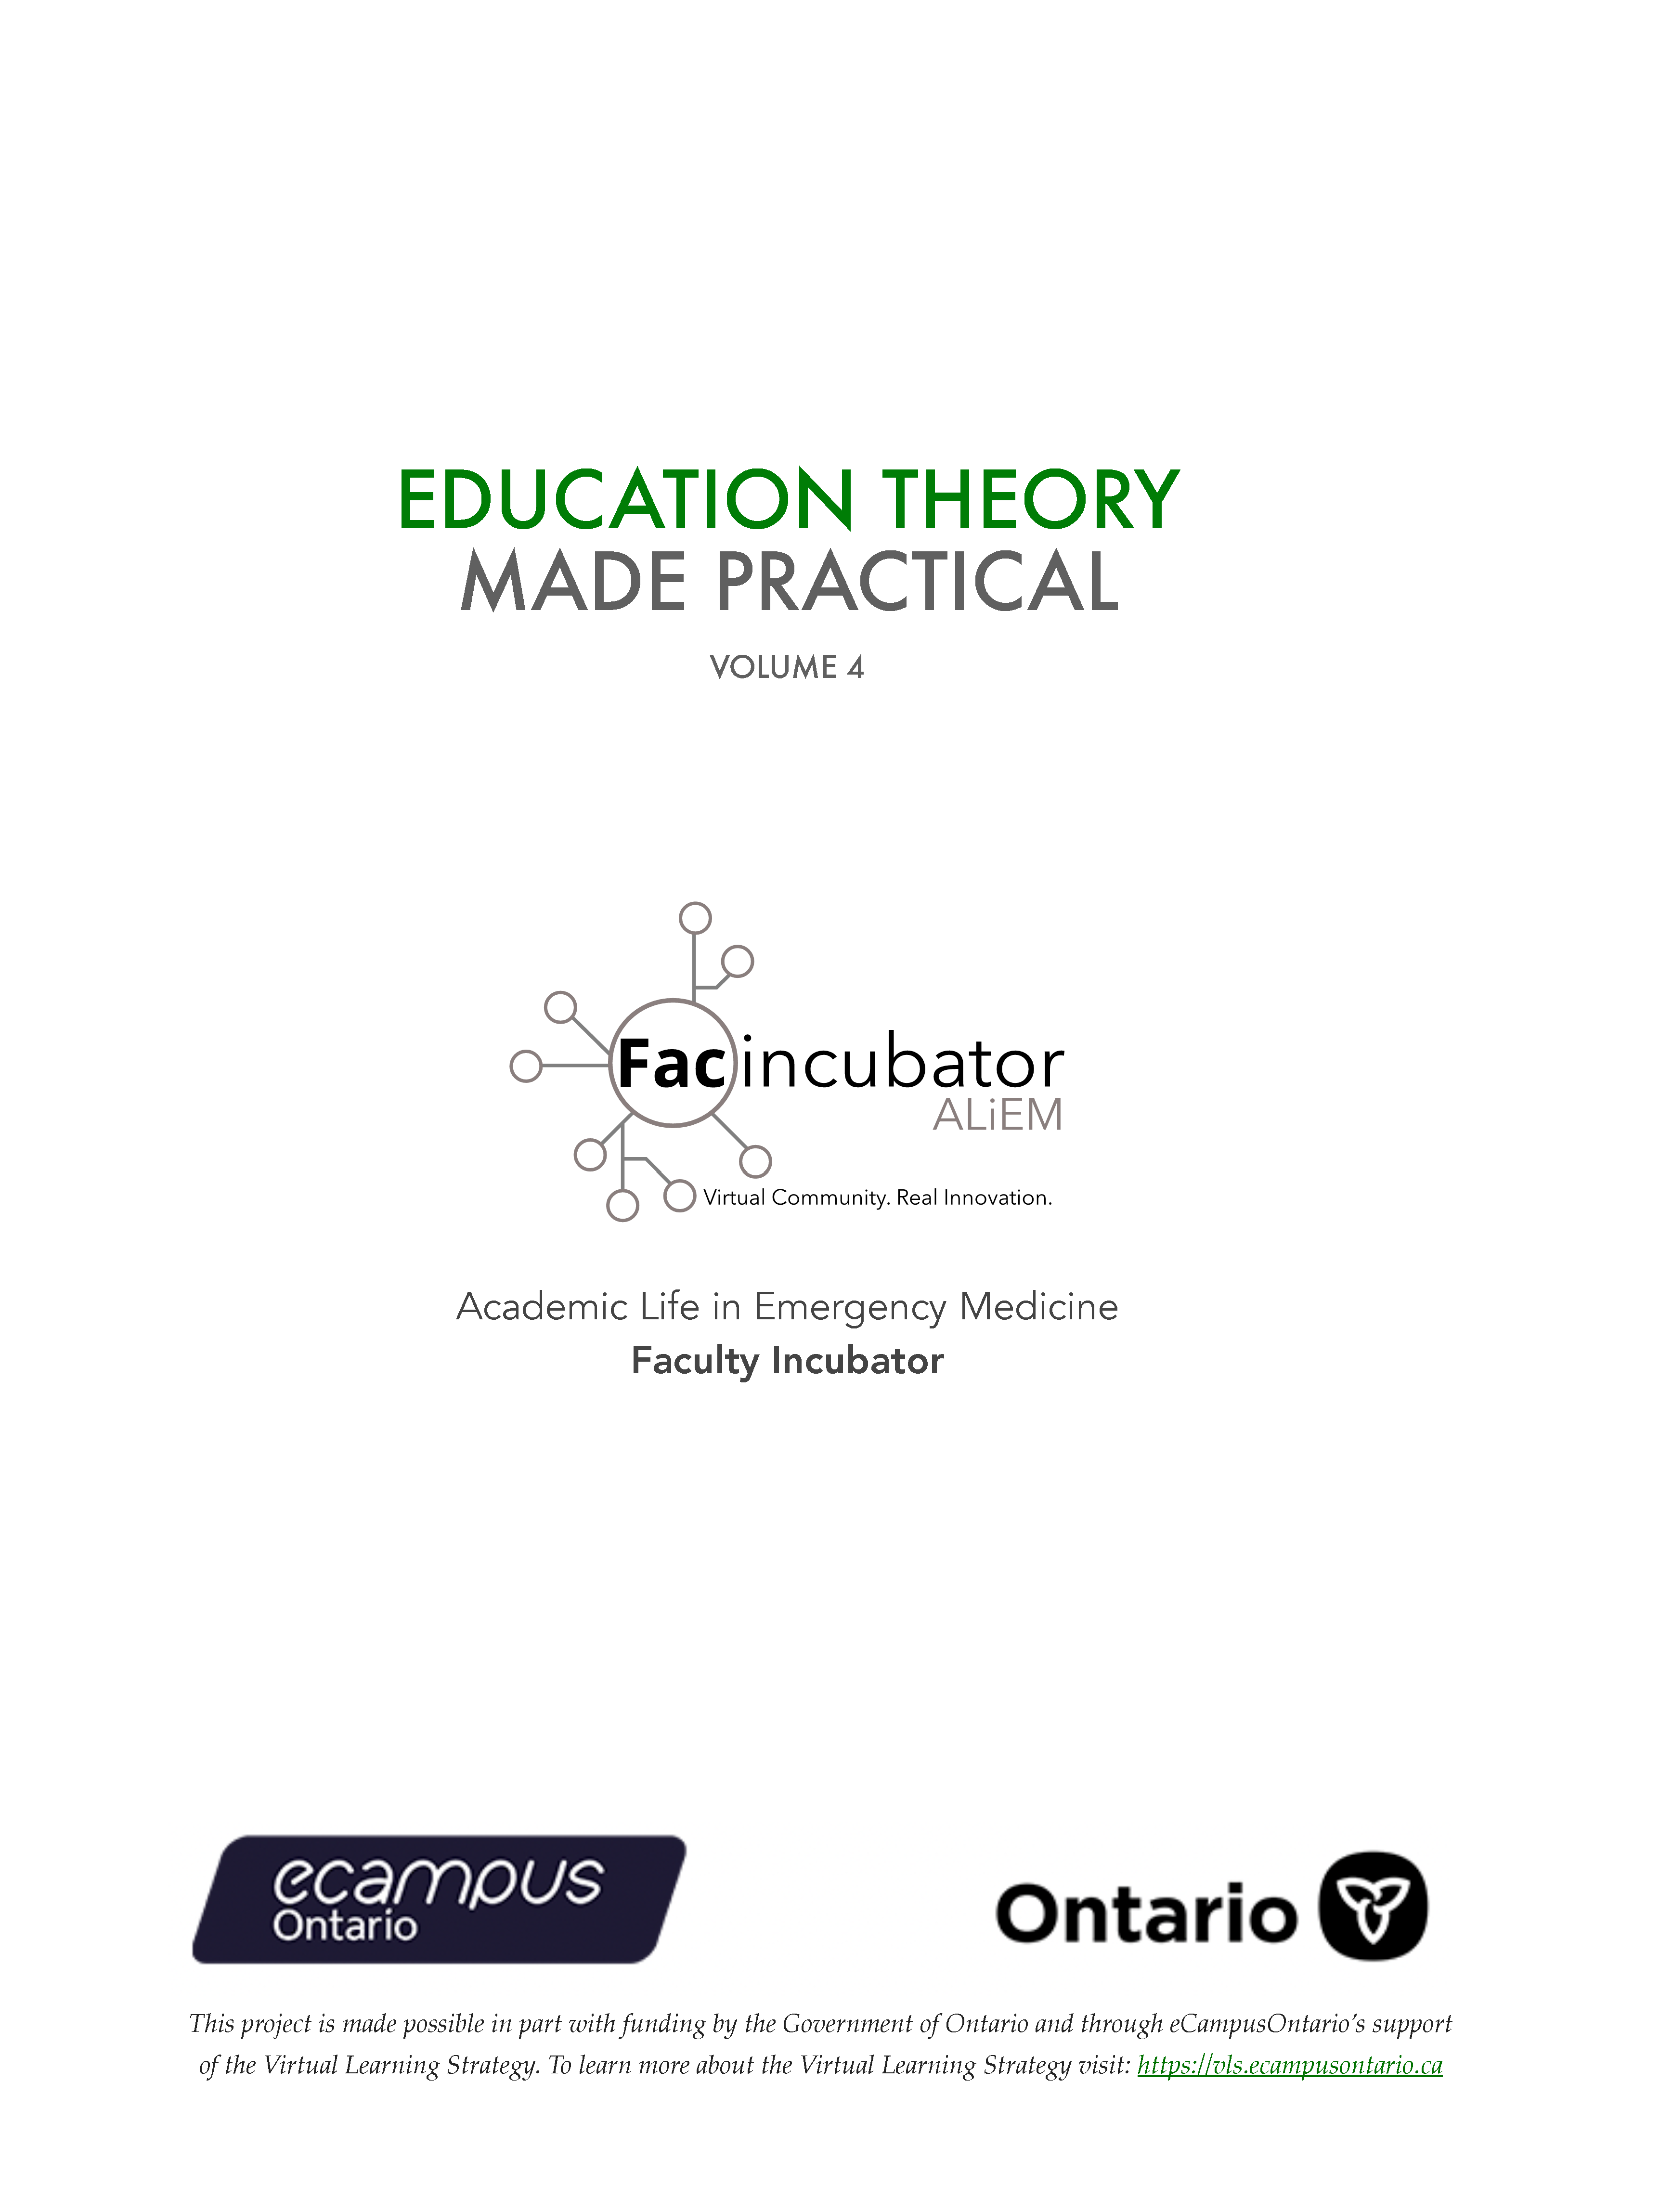 Education Theory Made Practical Volume 4. Academic Life in Emergency Medicine. Faculty Incubator. This project is made possible in part with funding by the Government of Ontario and through eCampusOntario’s support of the Virtual Learning Strategy. To learn more about the Virtual Learning Strategy visit: https://vls.ecampusontario.ca